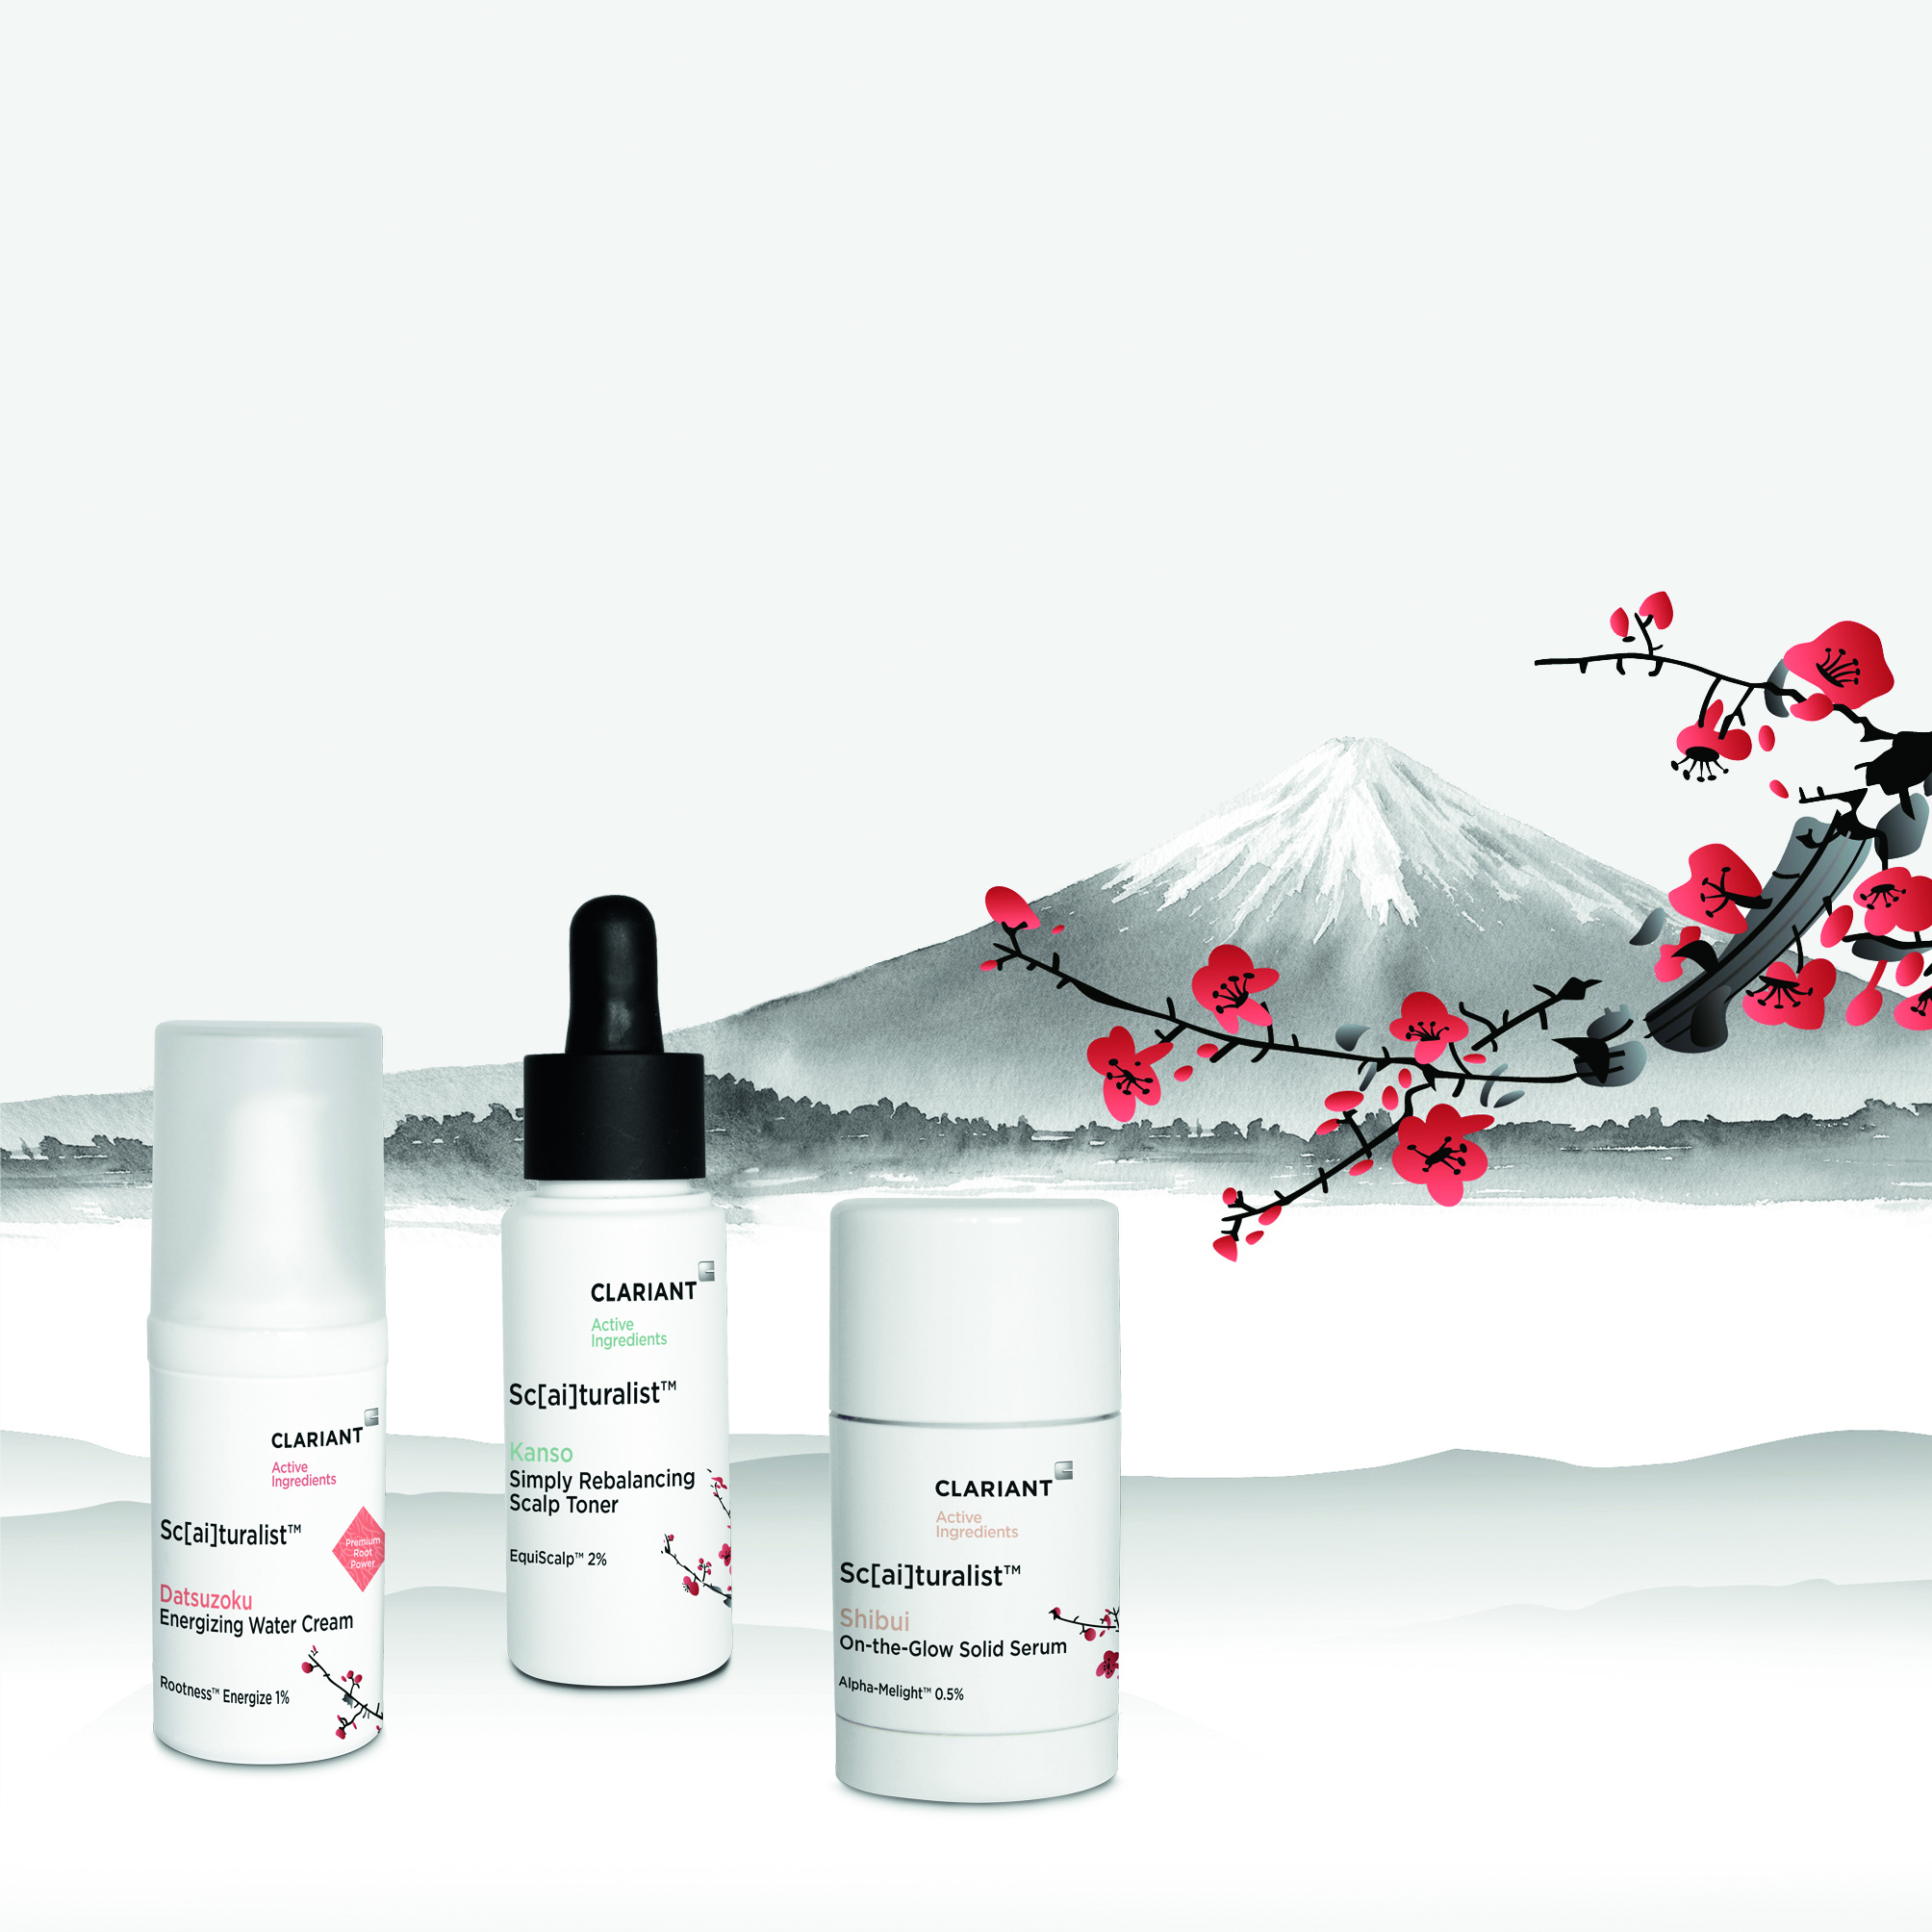 Welcome to award-winning "Zenspiration"! Clariant Active Ingredients' new concept features formula...